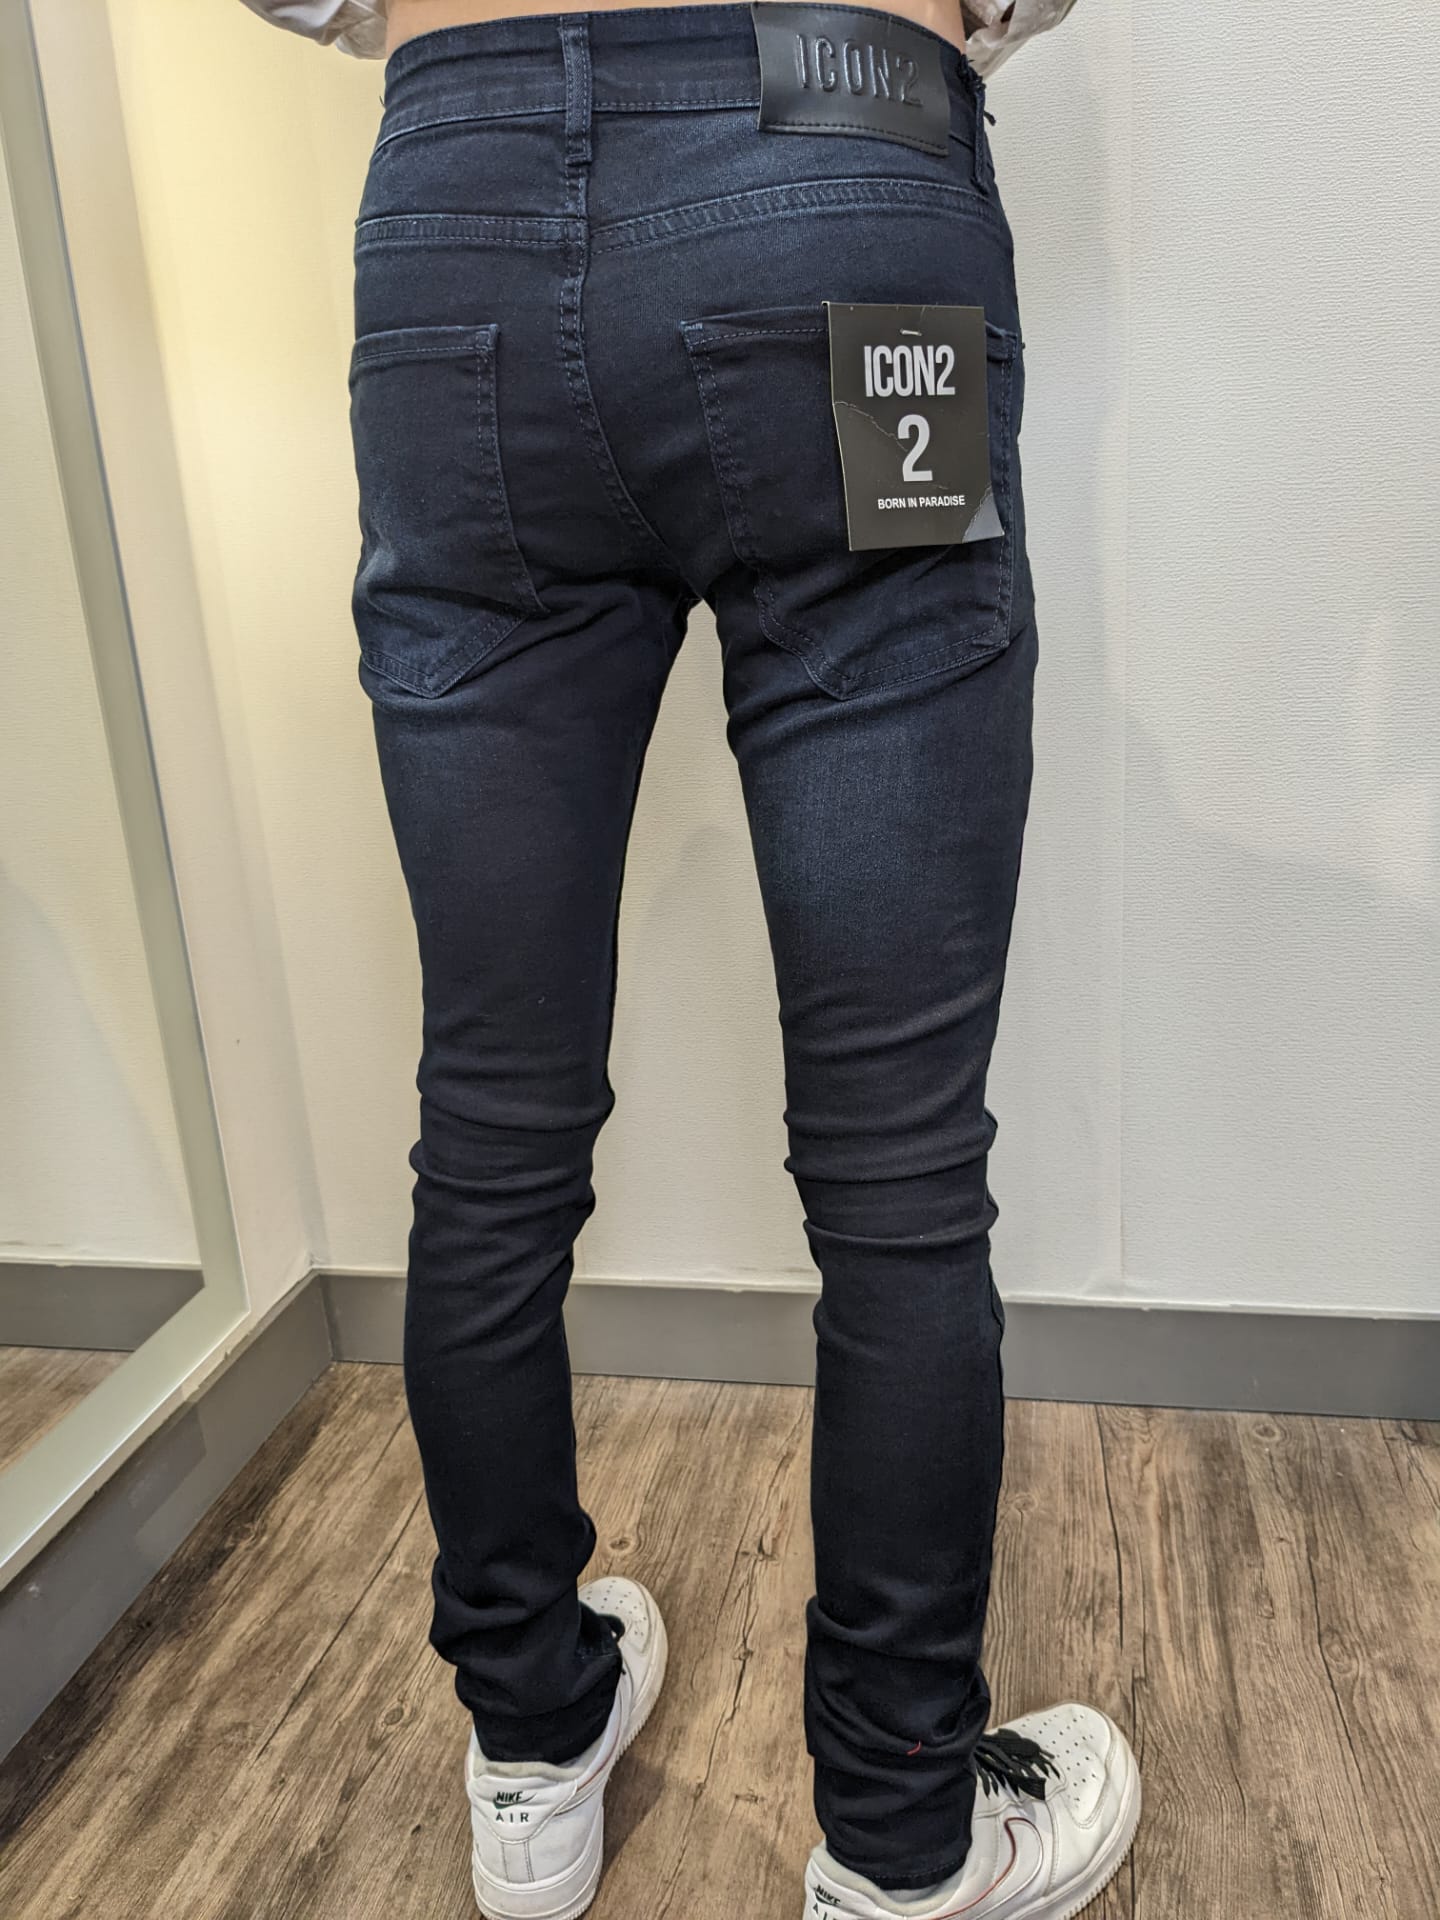 Jeans Icon 2 2